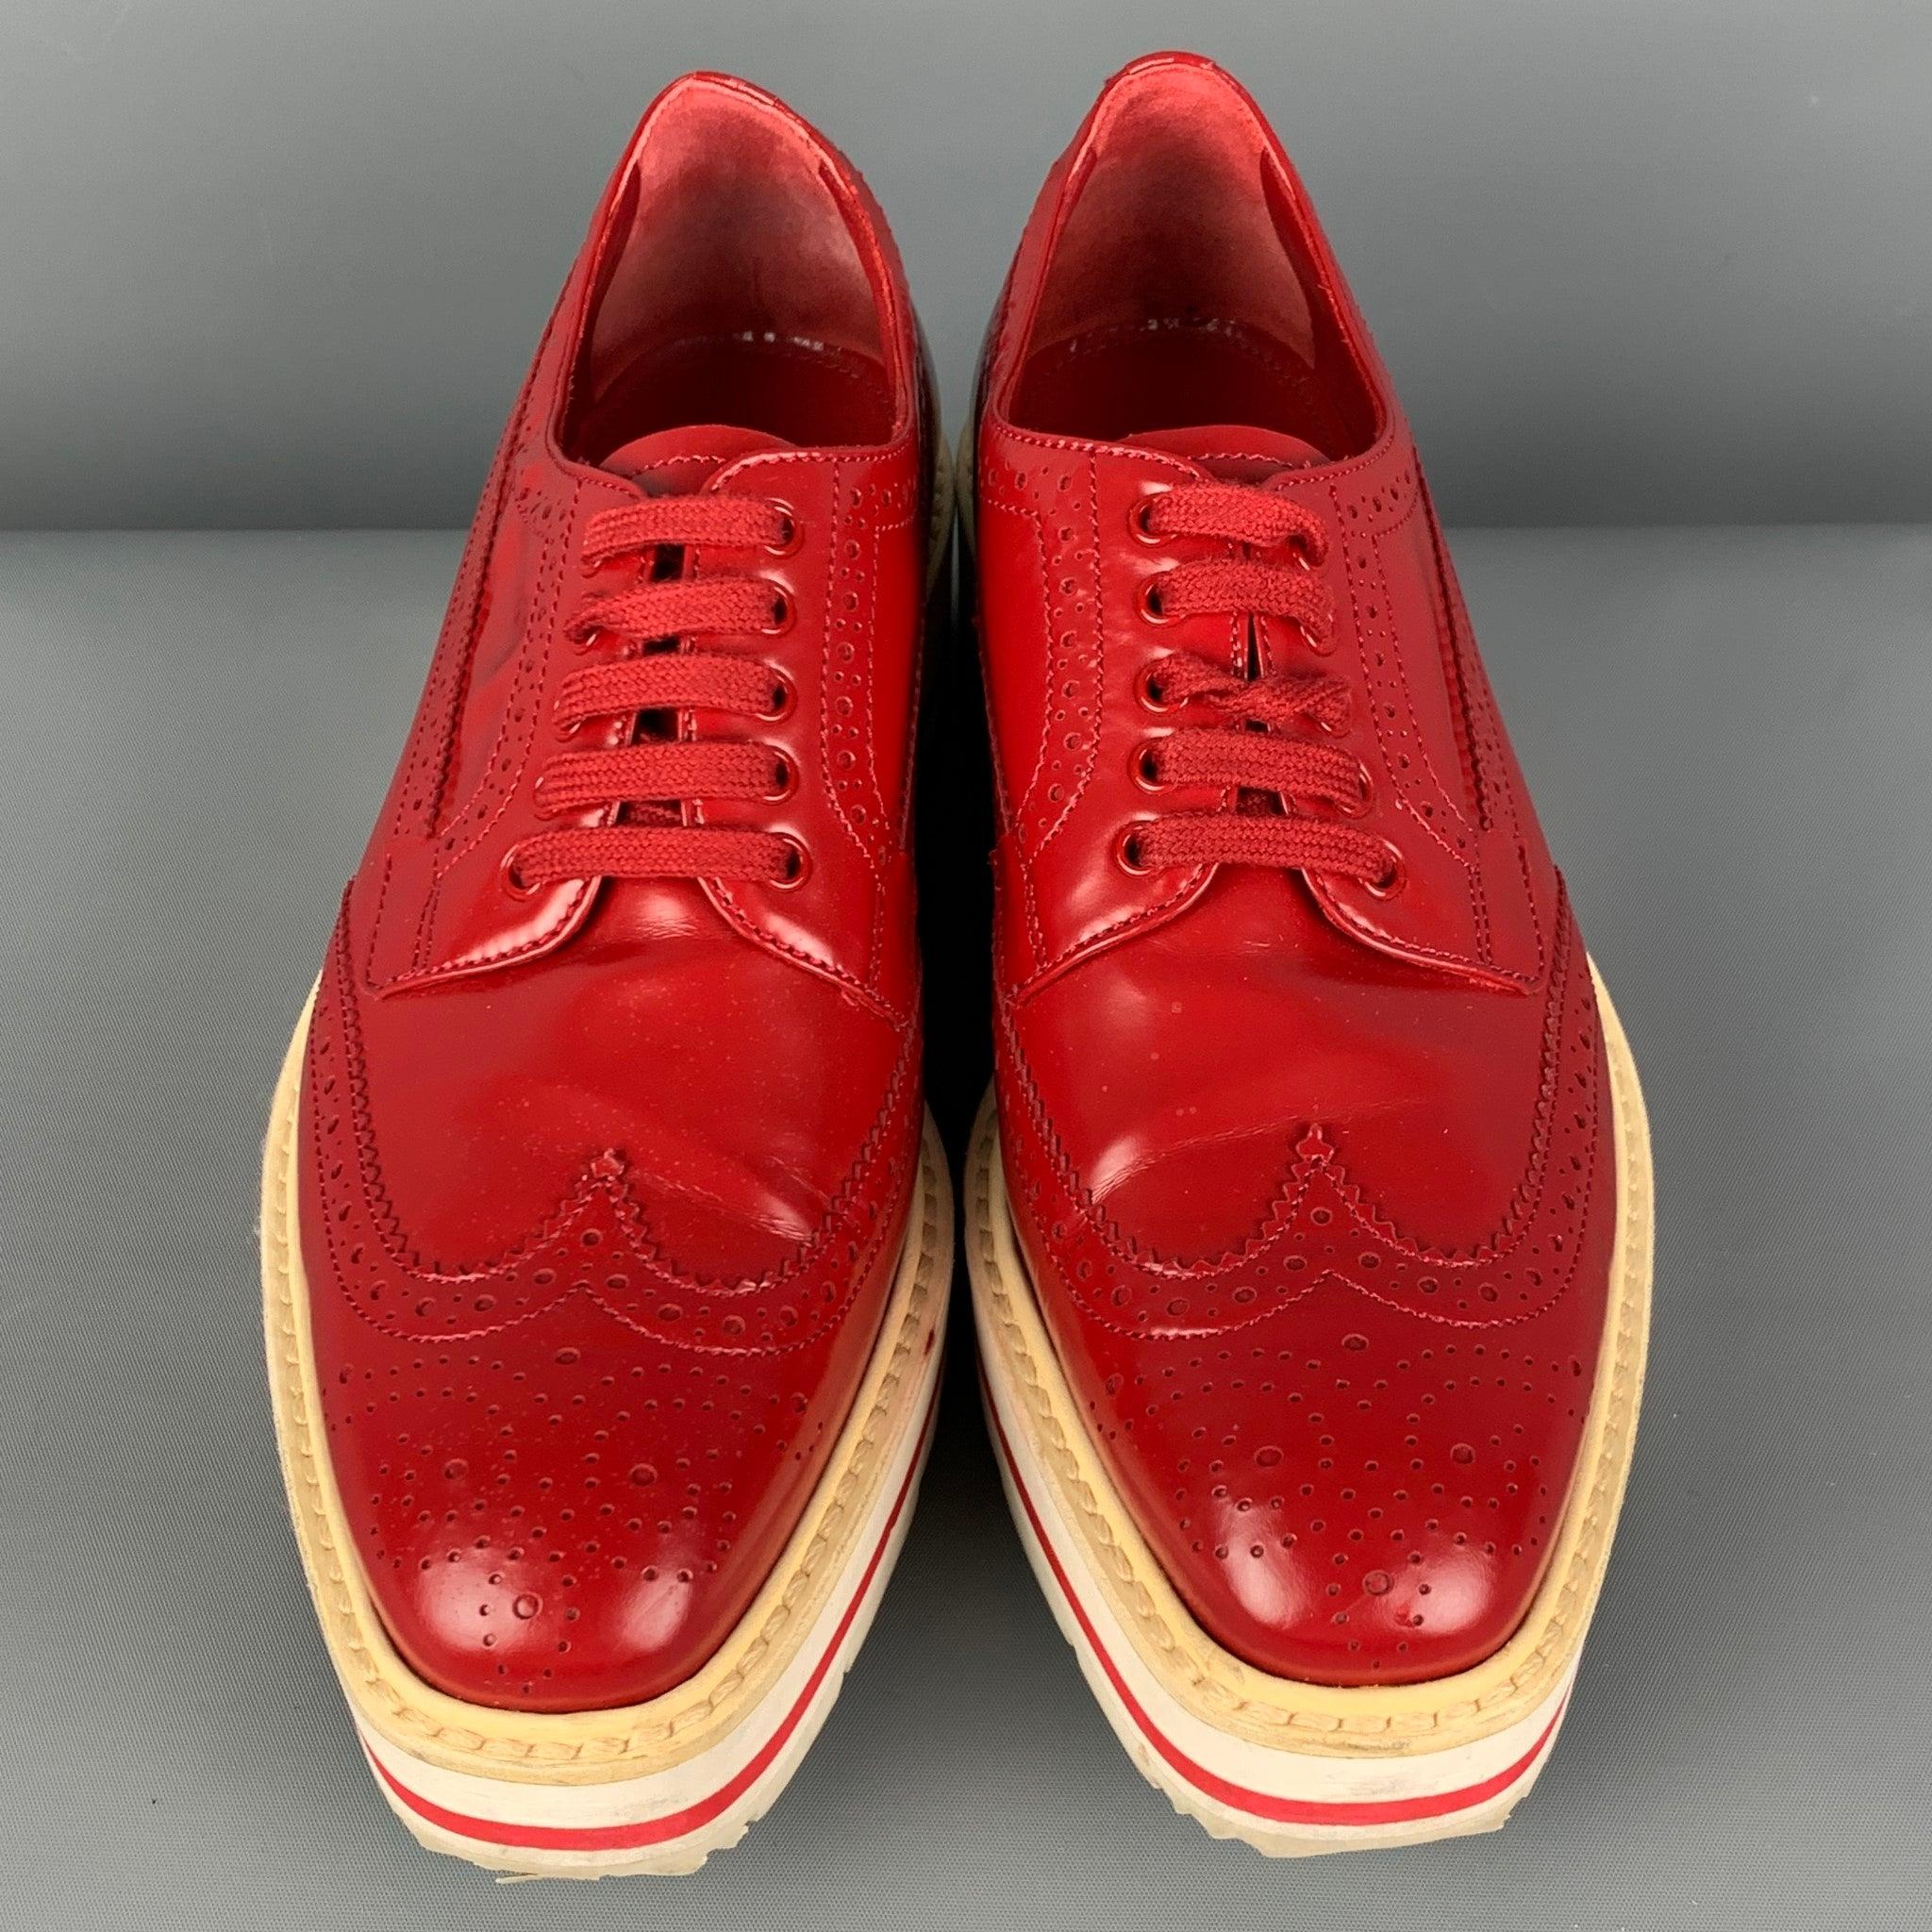 Women's PRADA Size 6 Red White Leather Perforated Wingtip Shoes For Sale